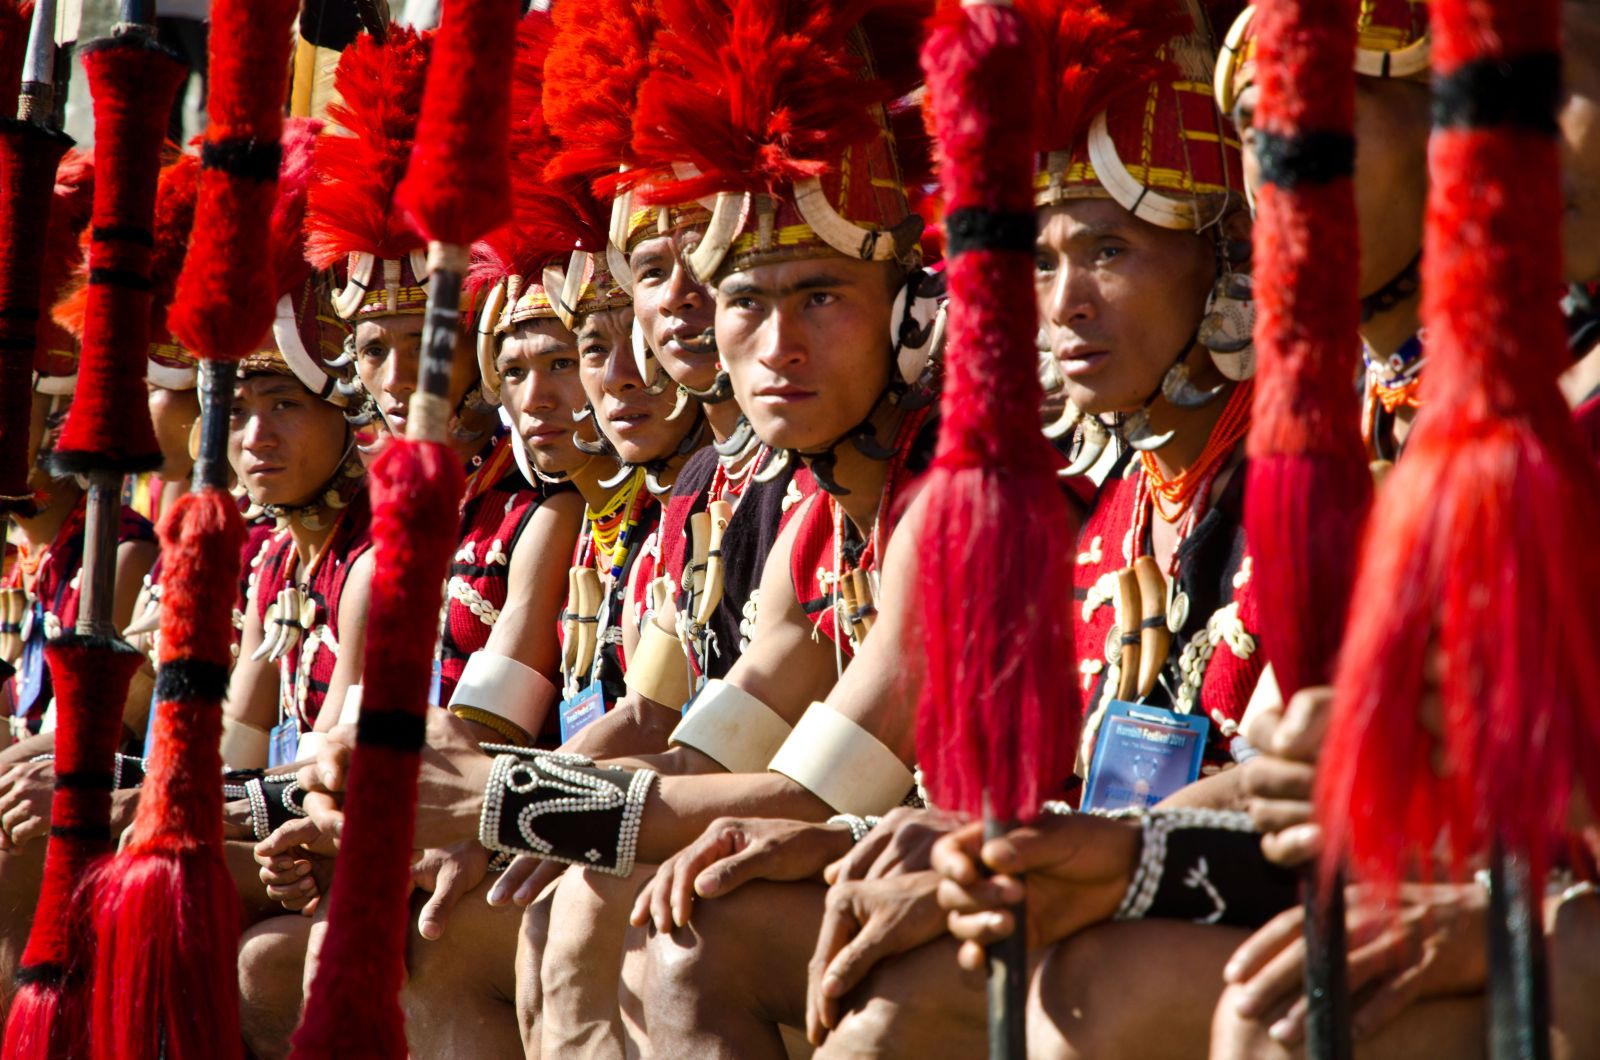 A row of men from the Tribes of Nagaland dressed in traditional red headdress and holding spears at the annual Hornbill Festival in India